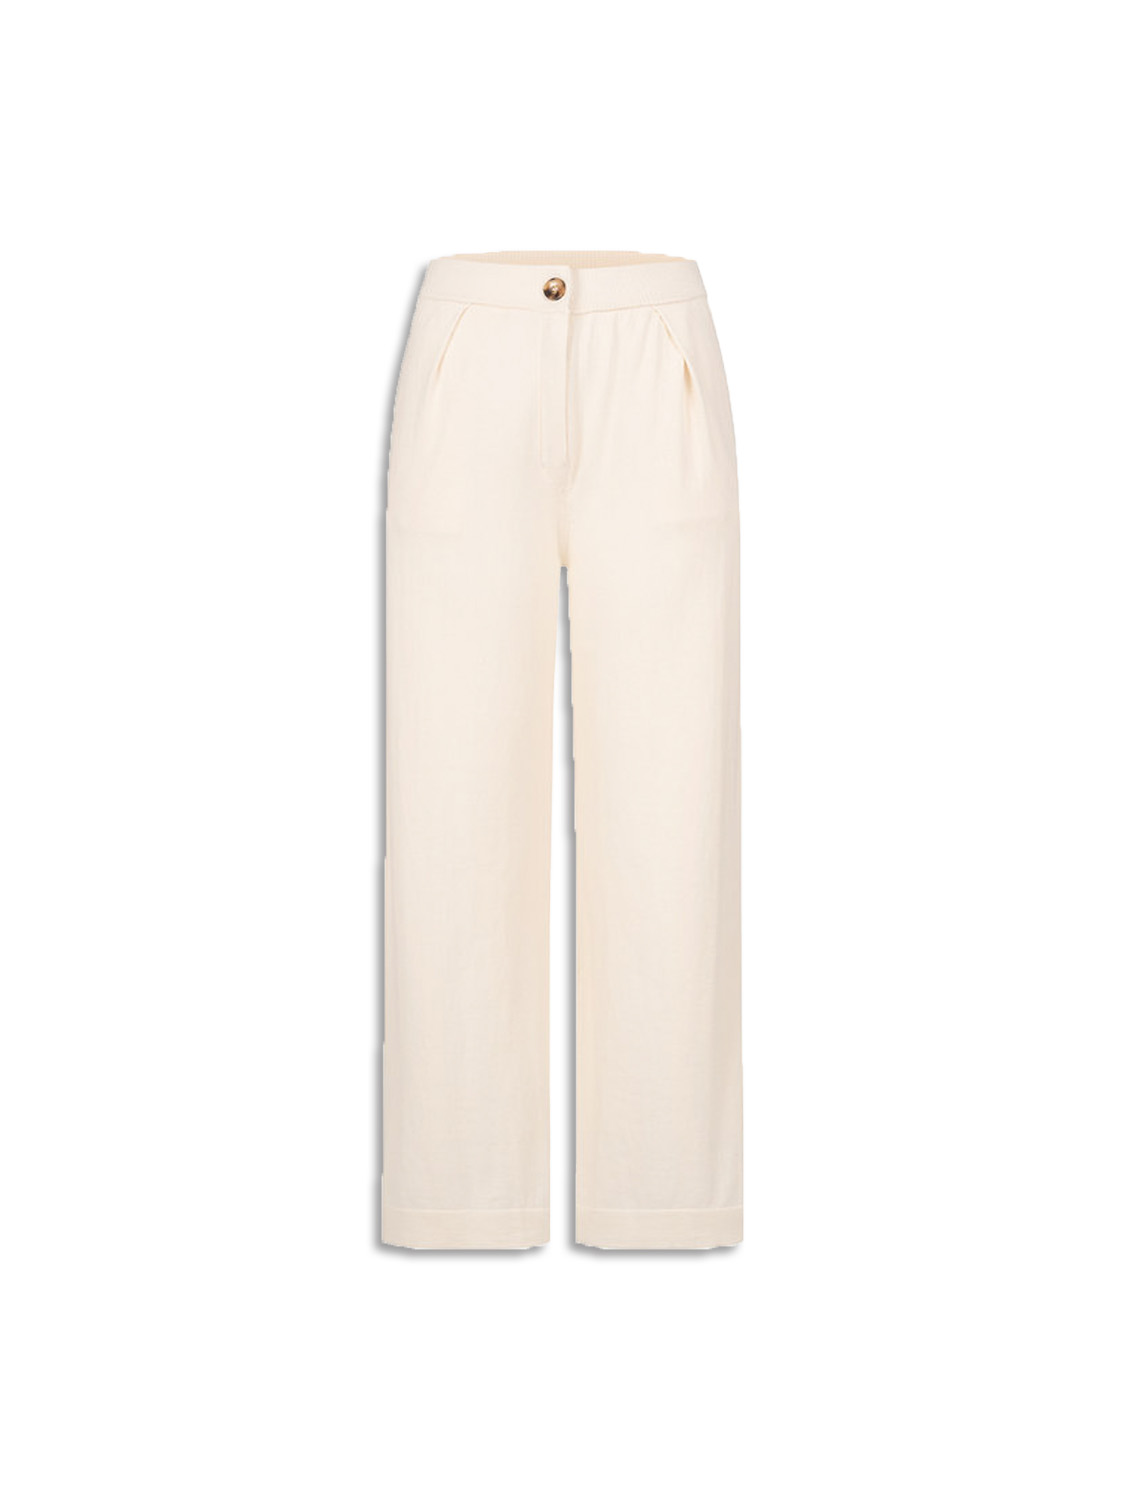 Pants with cashmere part and button detail